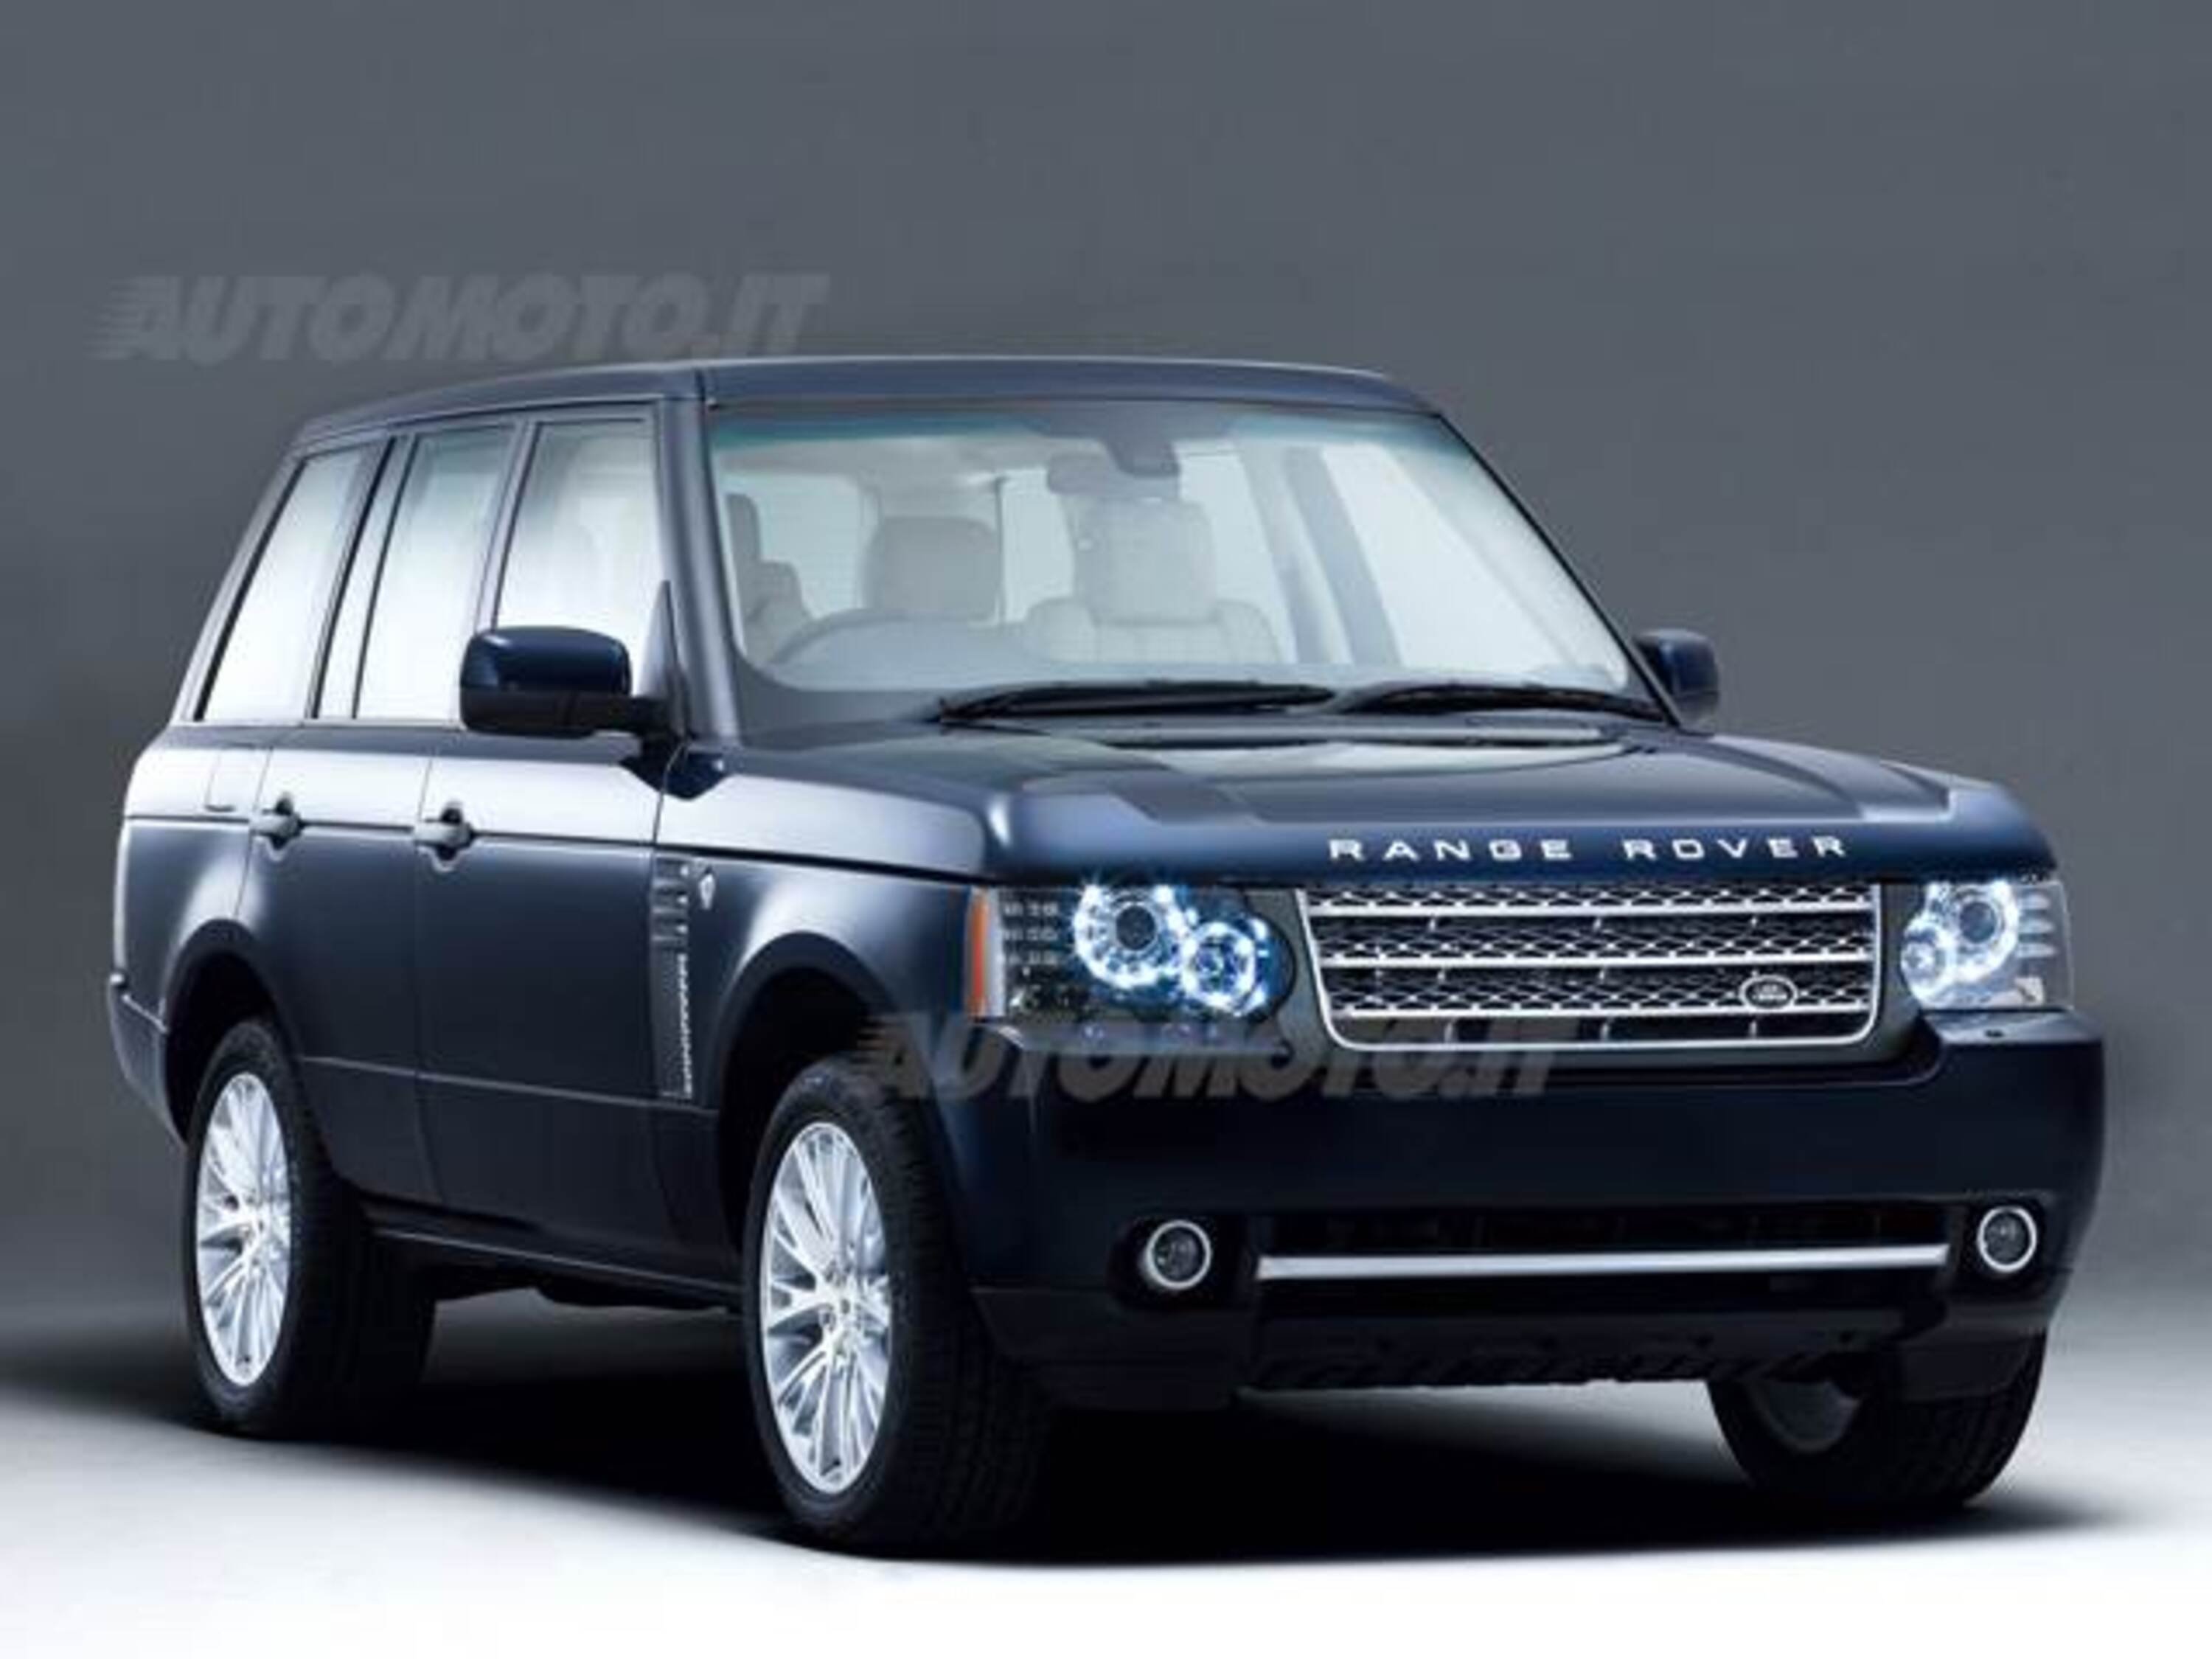 Land Rover Range Rover 5.0 V8 Autobiography my 10